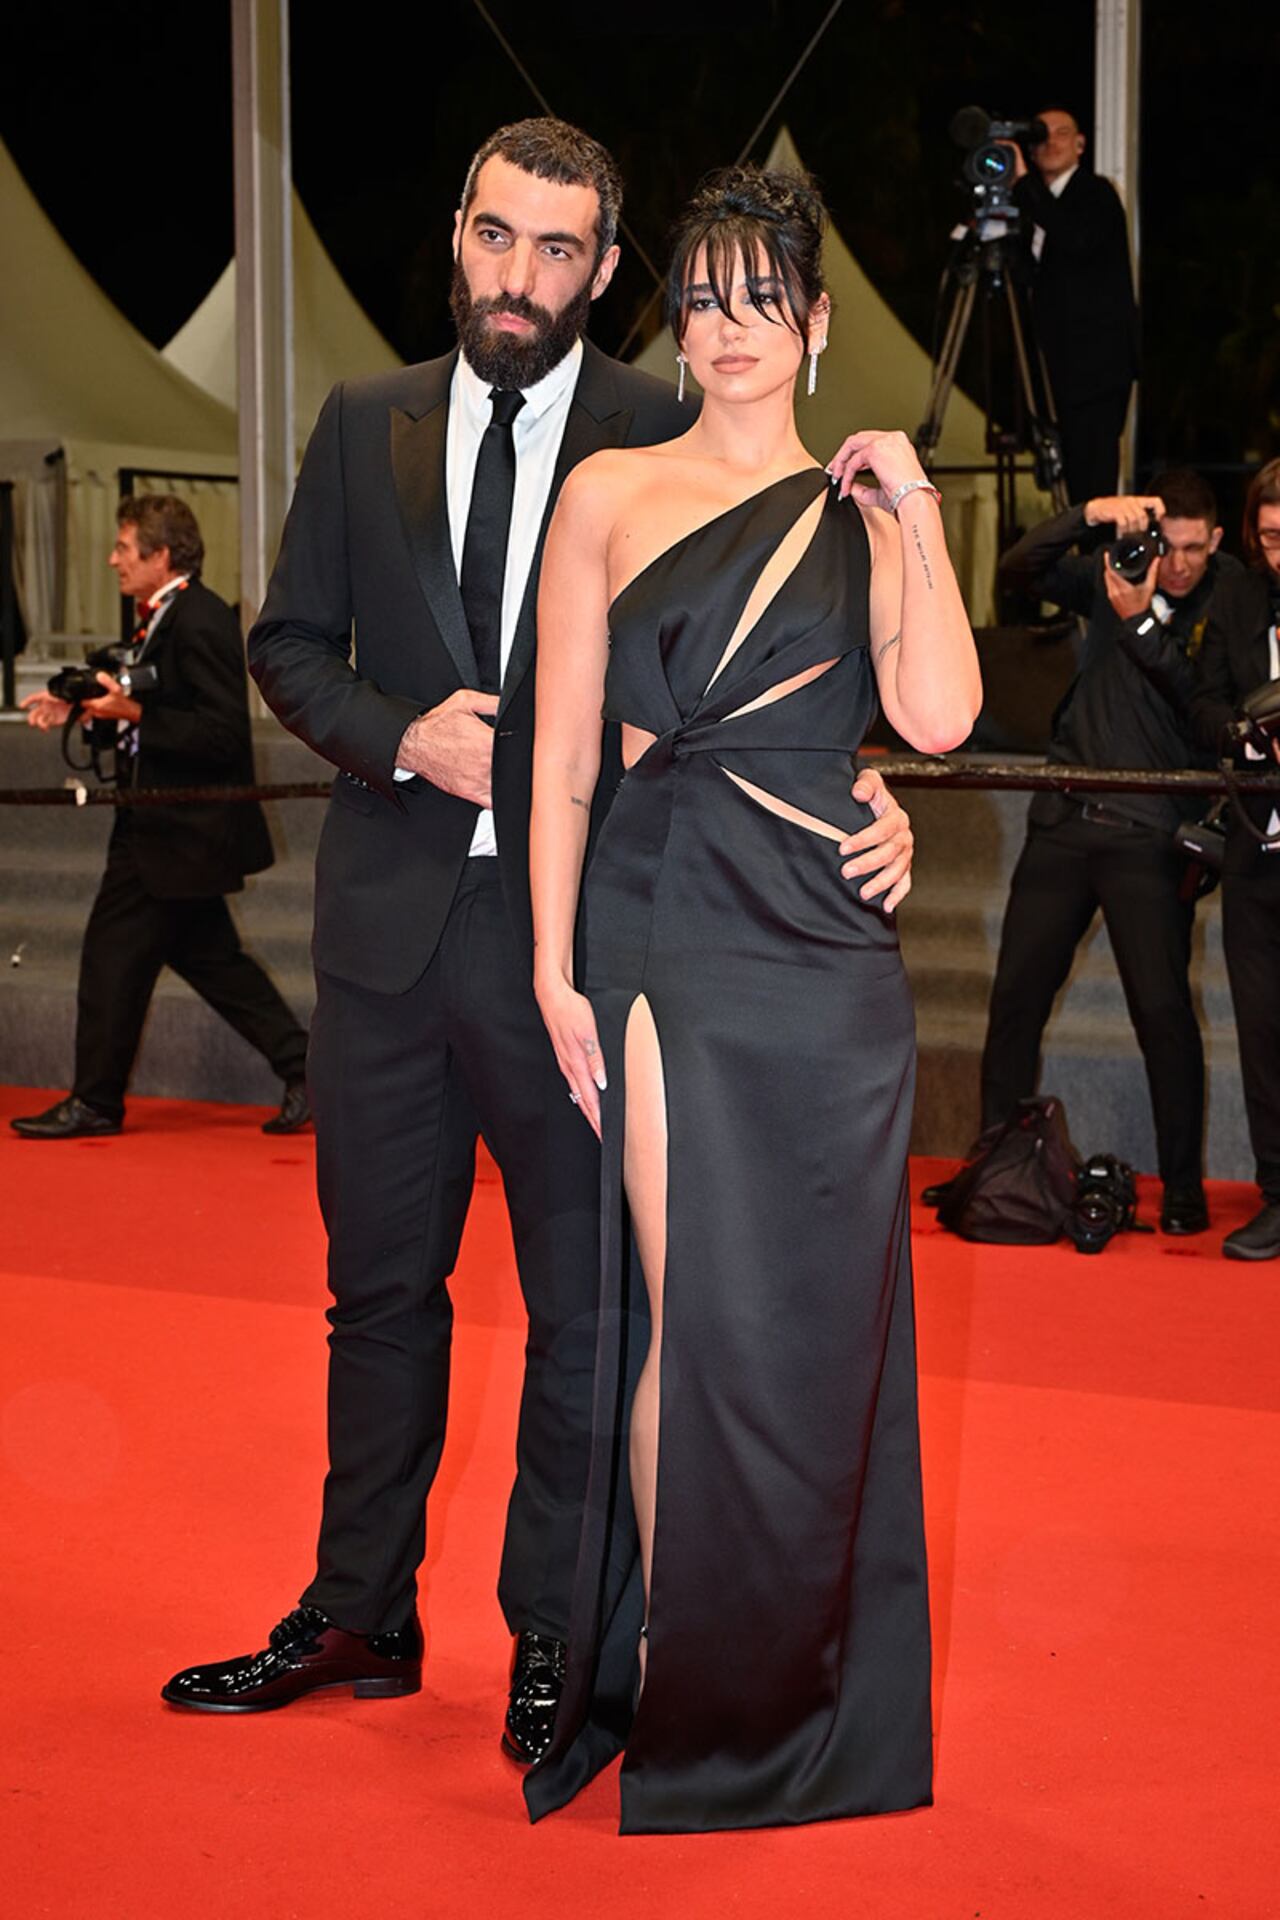 CANNES, FRANCE - MAY 19: Dua Lipa and Romain Gavras attend the "Omar La Fraise (The King of Algiers)" red carpet during the 76th annual Cannes film festival at Palais des Festivals on May 19, 2023 in Cannes, France. (Photo by Stephane Cardinale - Corbis/Corbis via Getty Images)